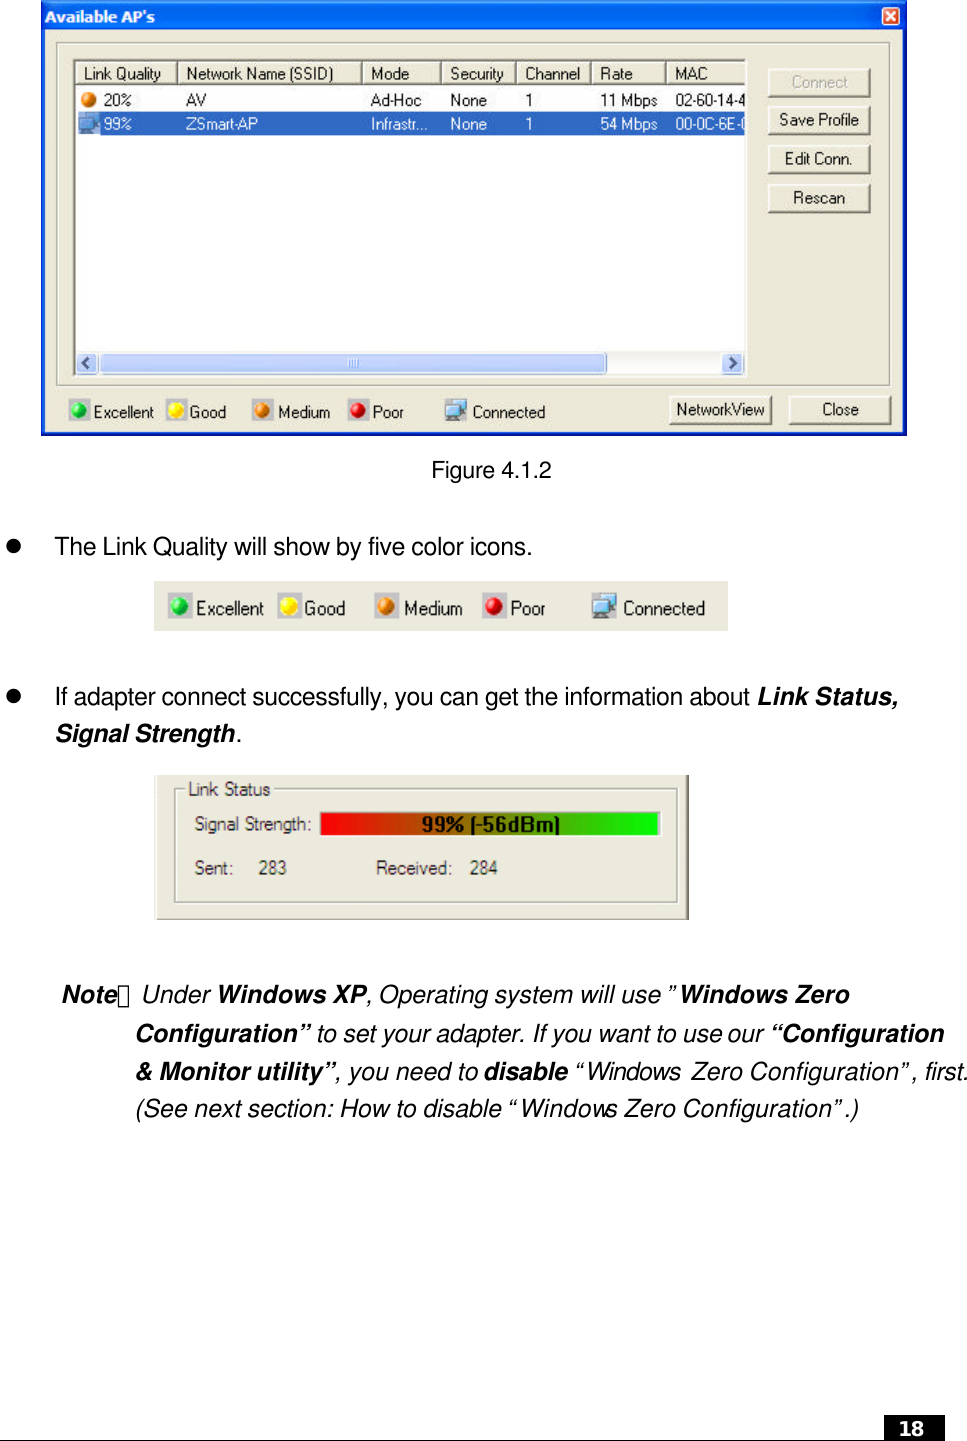  18                Figure 4.1.2  l The Link Quality will show by five color icons.               l If adapter connect successfully, you can get the information about Link Status, Signal Strength.         Note：Under Windows XP, Operating system will use ”Windows Zero Configuration” to set your adapter. If you want to use our “Configuration &amp; Monitor utility”, you need to disable “Windows  Zero Configuration”, first. (See next section: How to disable “Windows Zero Configuration”.)     